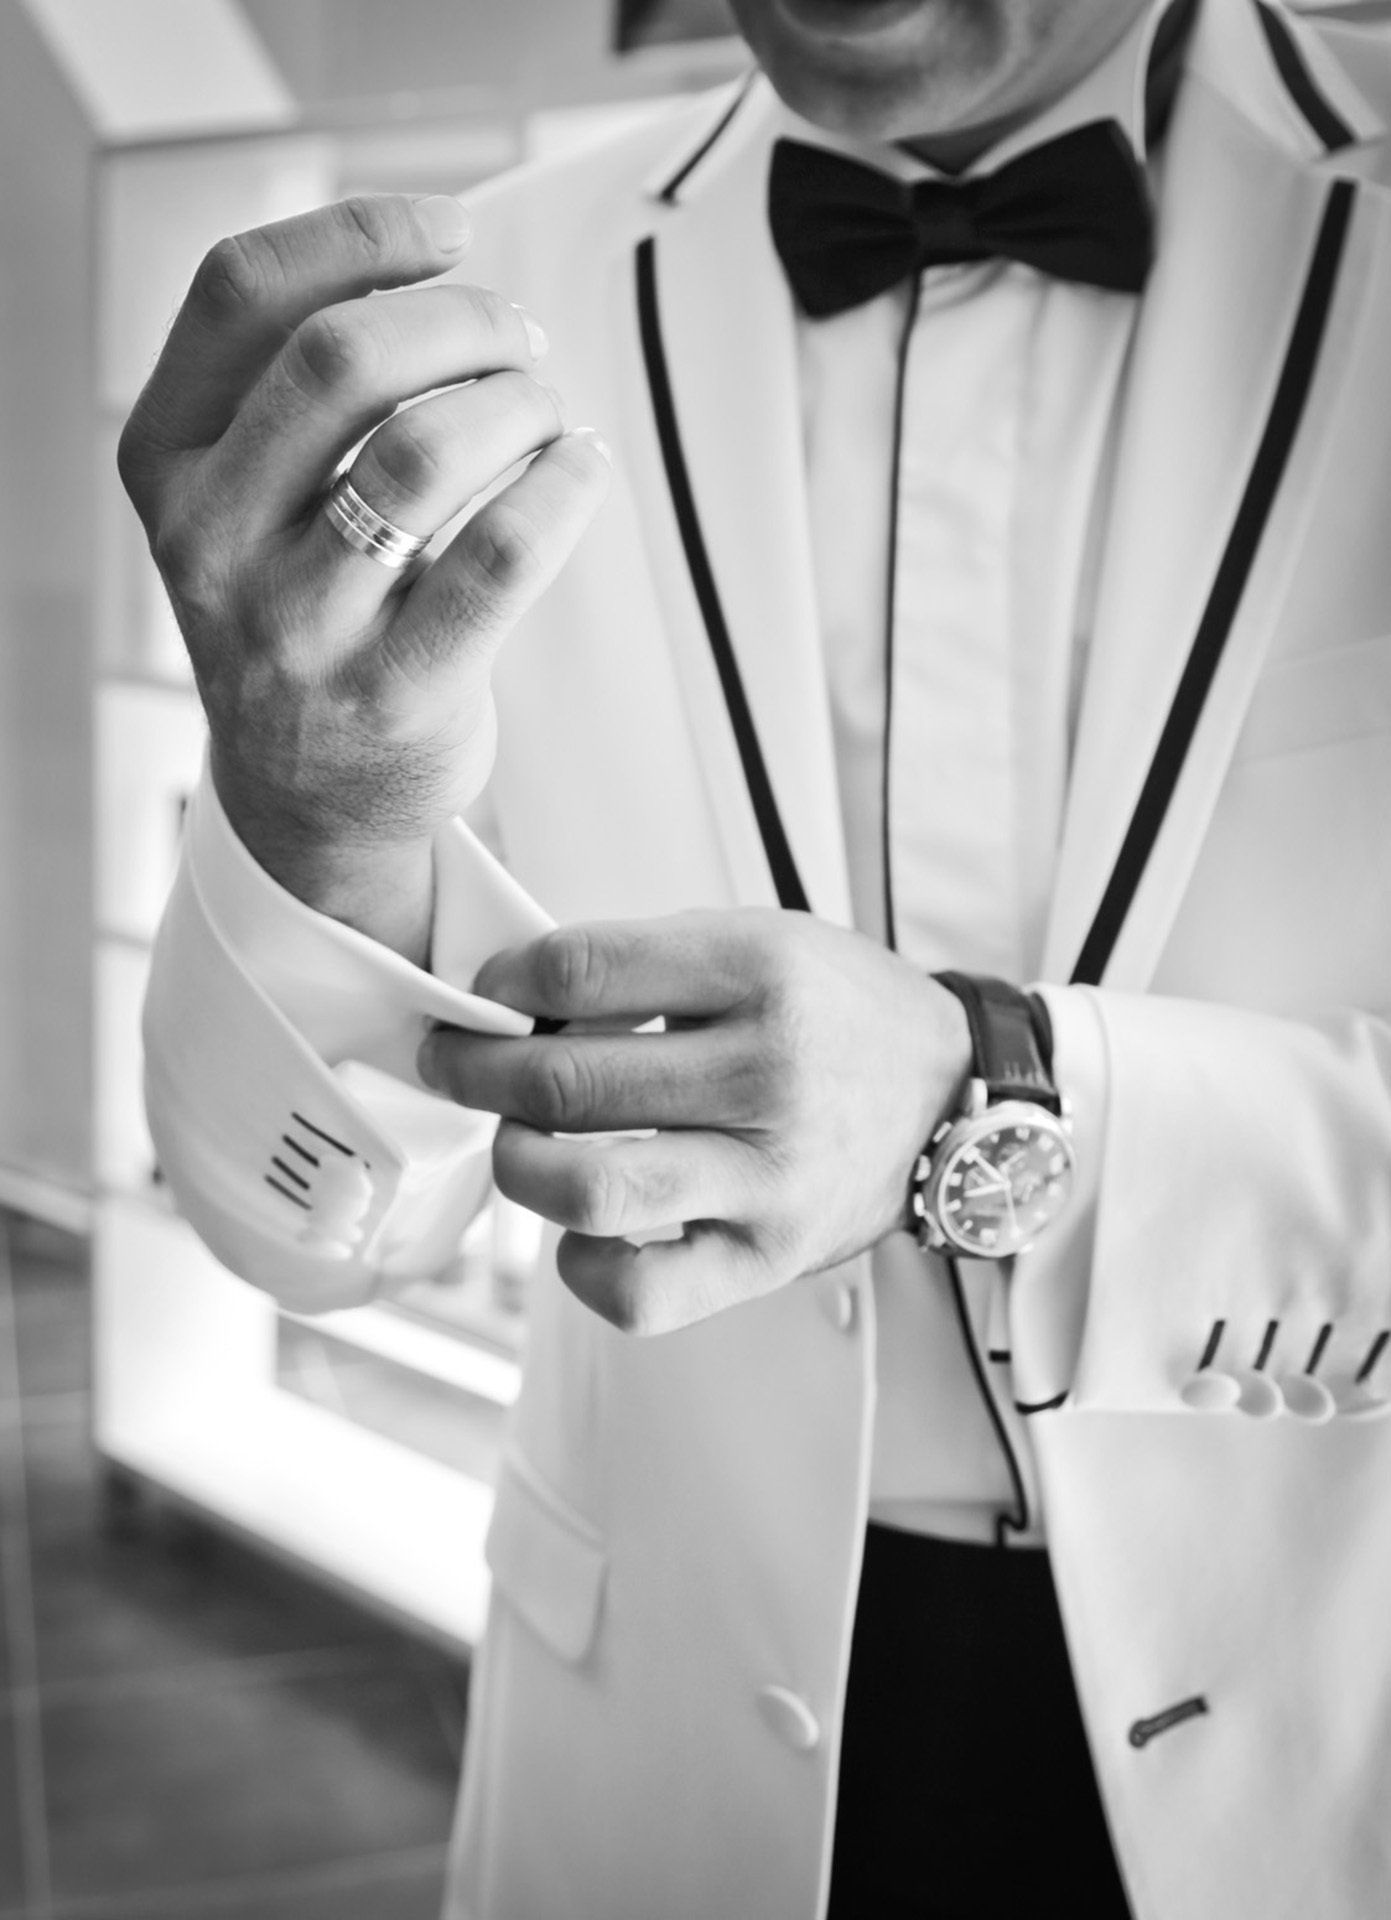 A man in a tuxedo and bow tie is adjusting his cufflinks